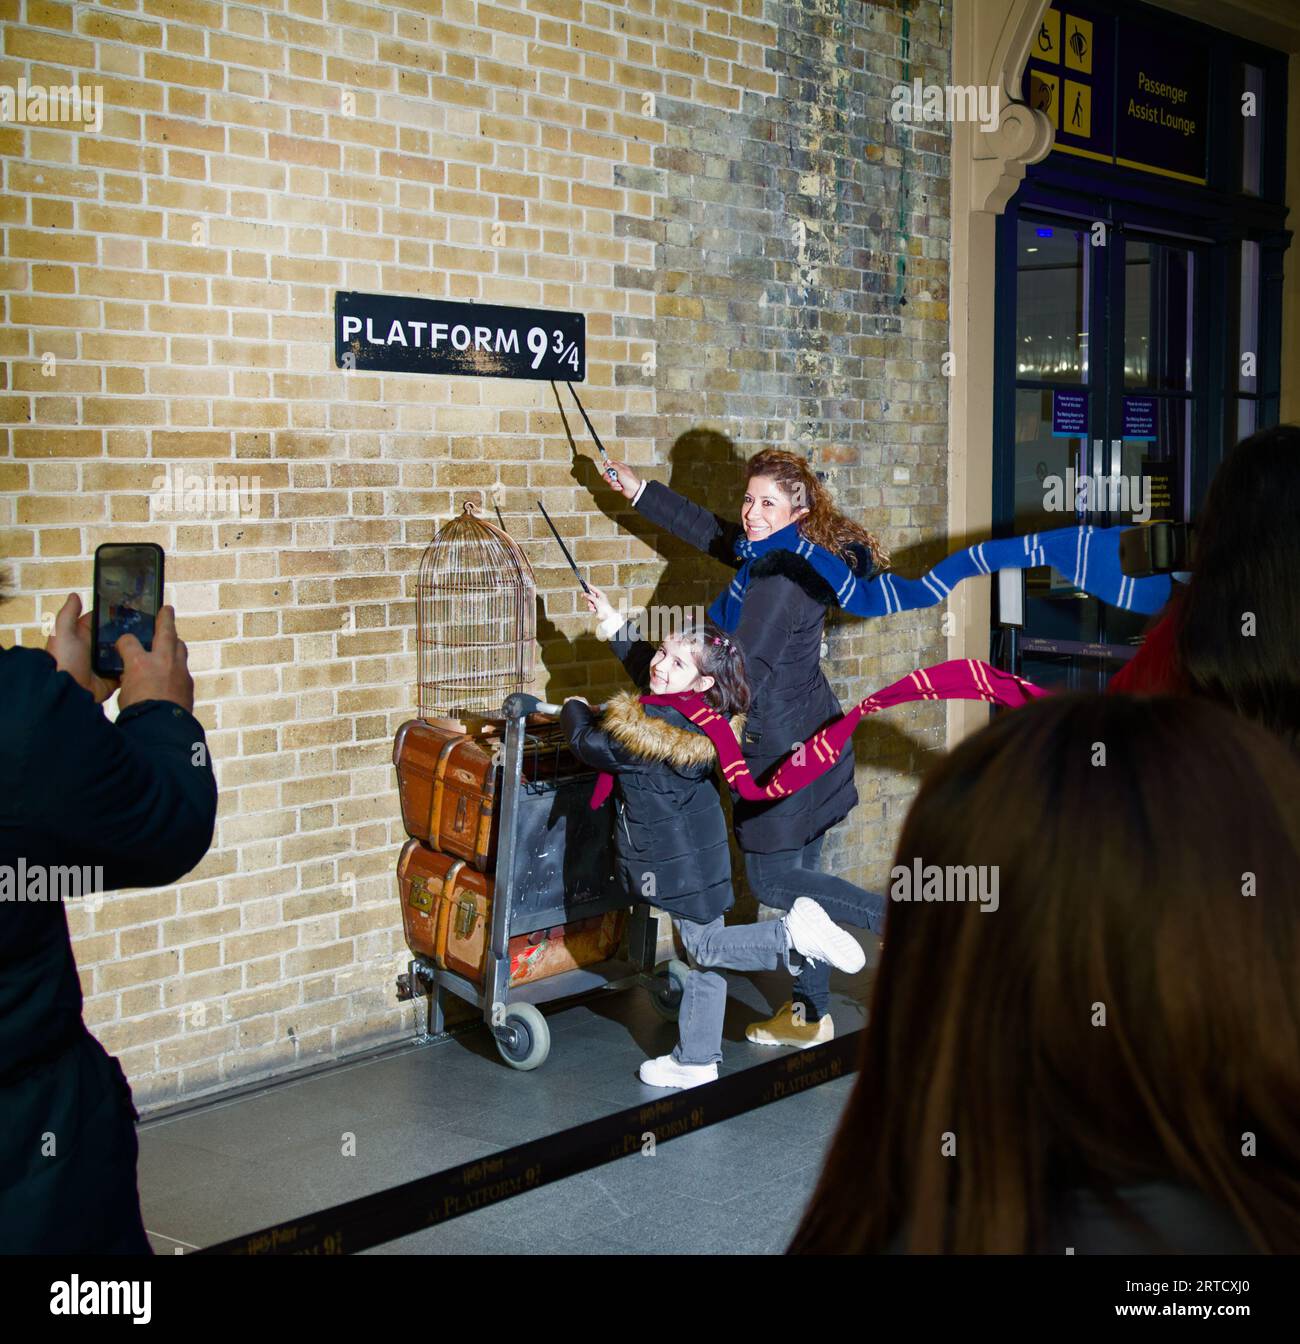 Mother And Daughter Having Their Photograph Taken At Harry Potters Platform 9 3/4, Kings Cross Station, London UK Stock Photo